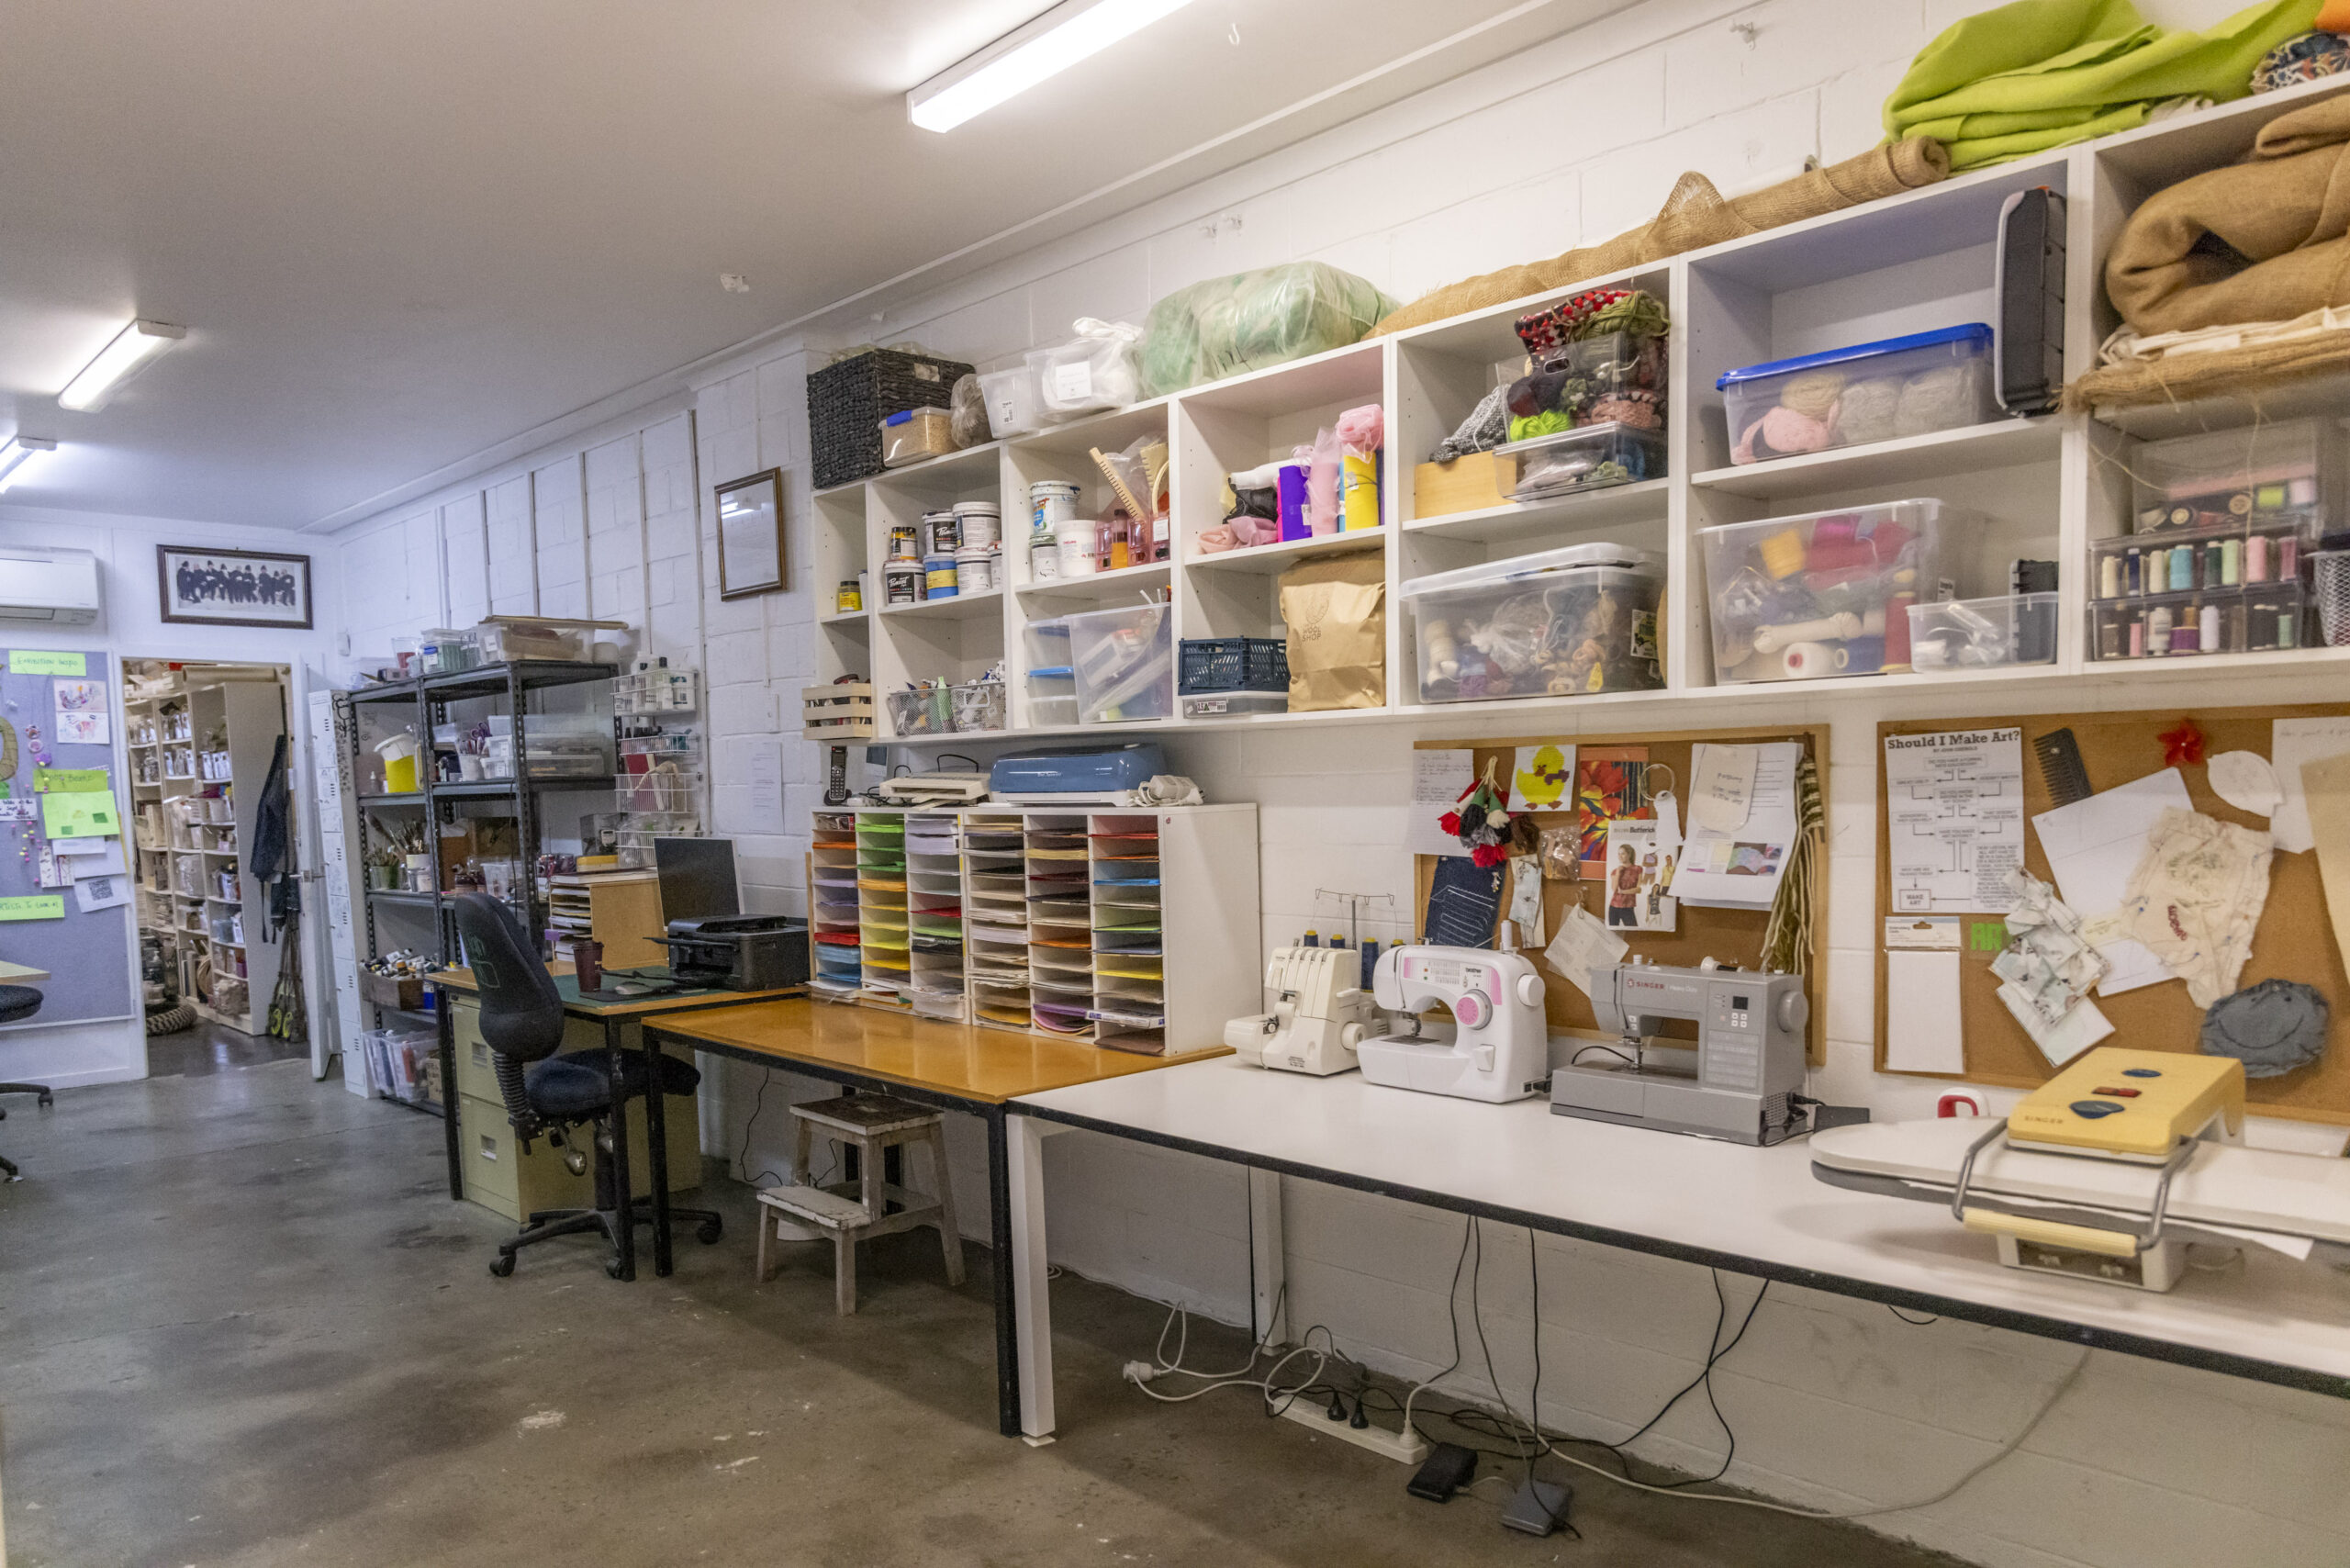 Image of the wonderful Artosaurus Studio and workshop space as part of their Artist Profile with Art Trails Tasmania